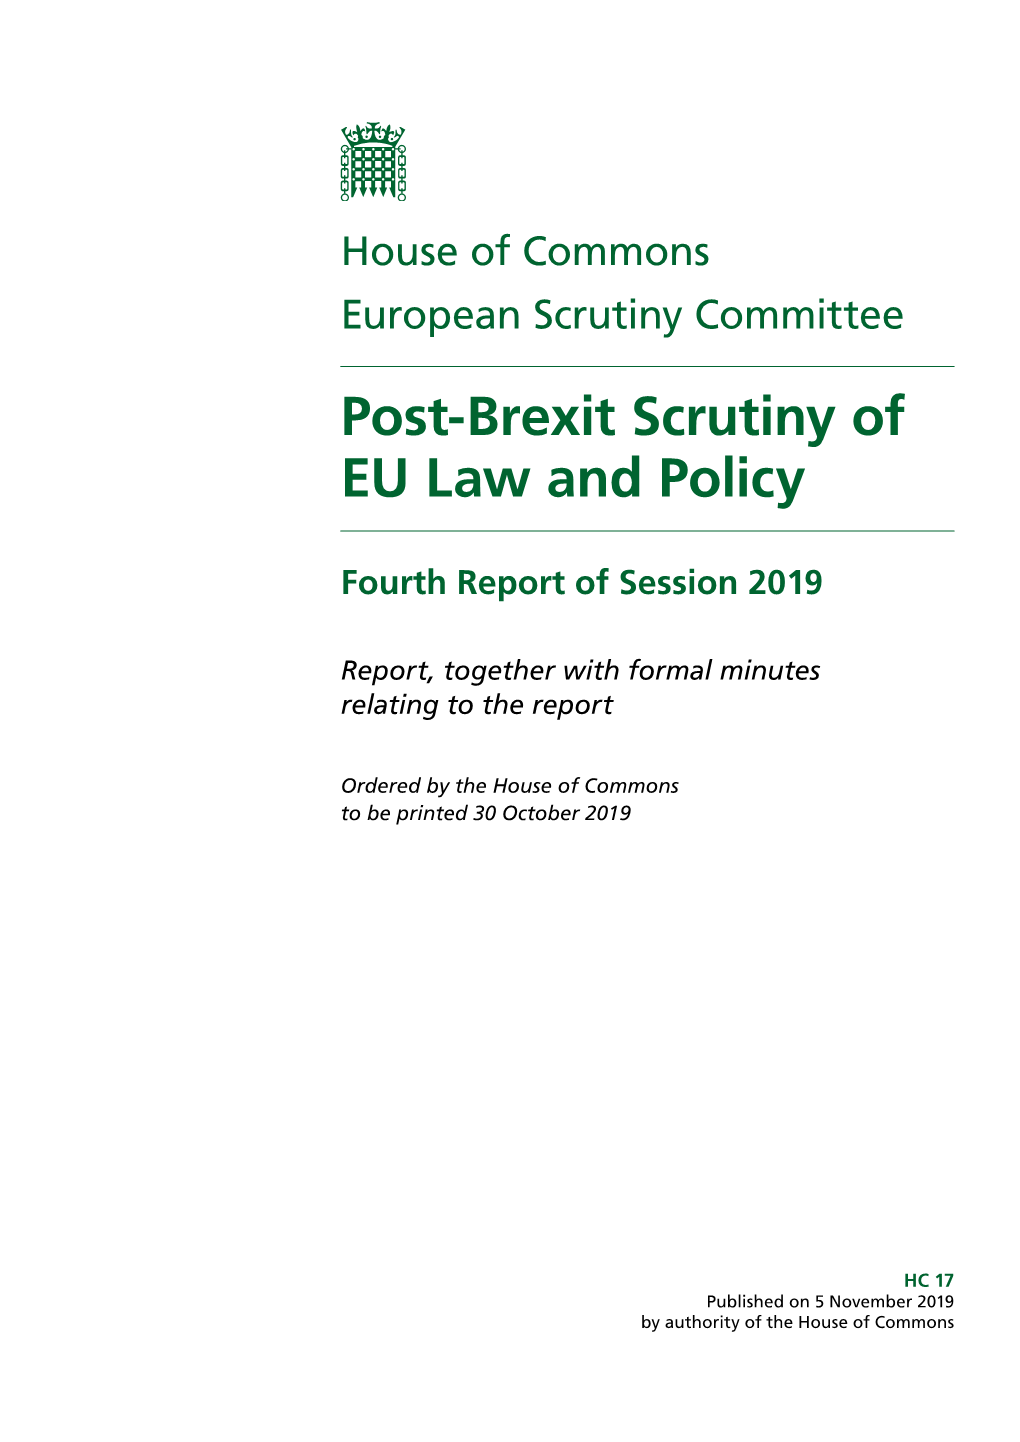 Post-Brexit Scrutiny of EU Law and Policy